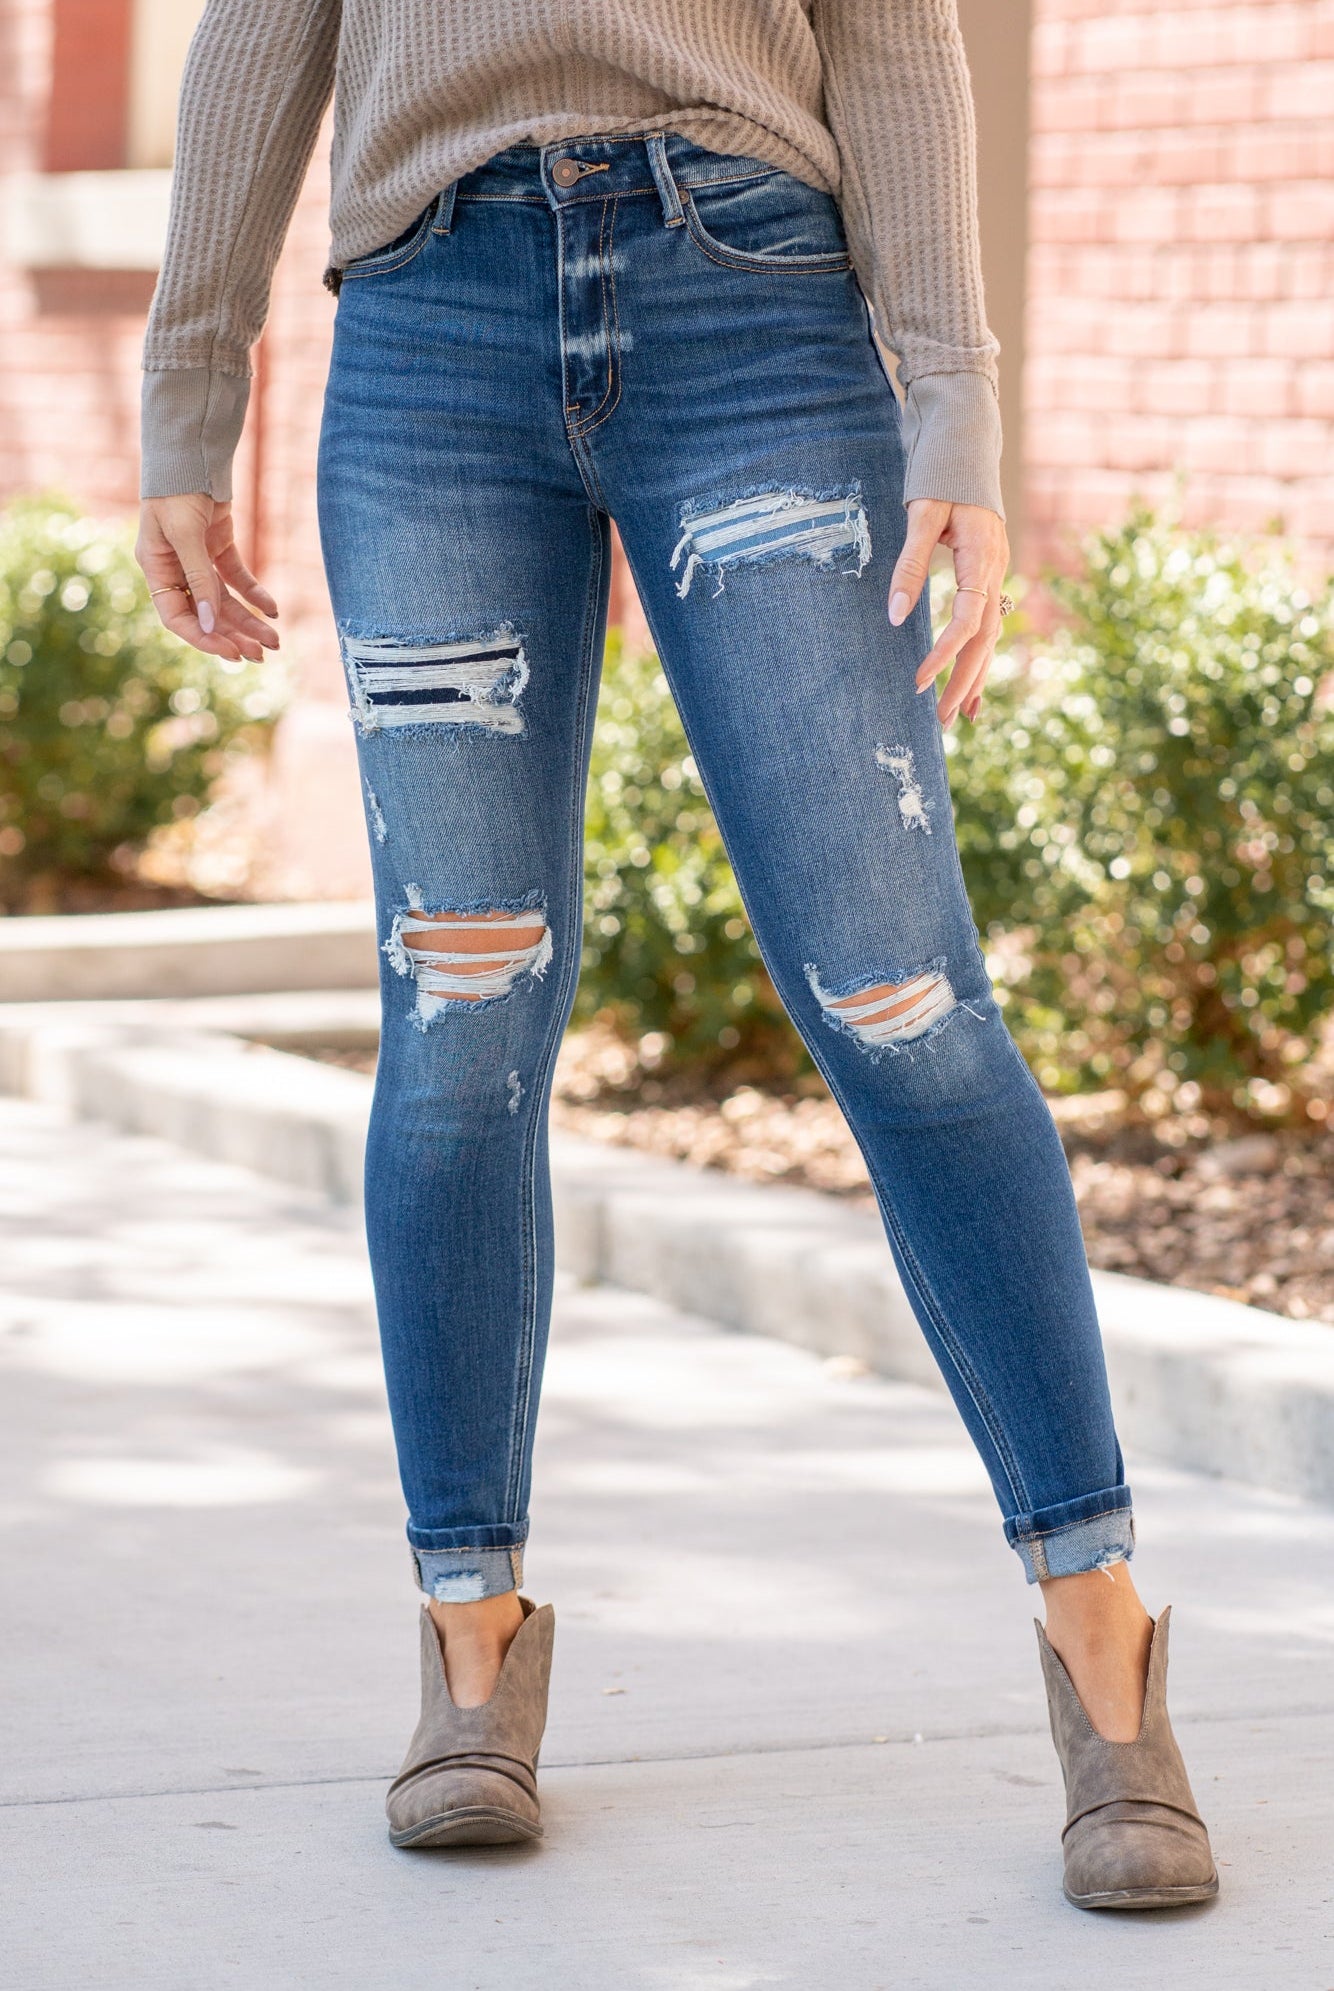 KanCan Jeans  KanCan Stretchy!    Color: Medium Wash Cut: Ankle Skinny, 27.5" Inseam Rise: High-Rise, 9.75" Front Rise 93% COTTON , 5% POLYESTER , 2% SPANDEX Fly: Zipper  Style #: KC2503M Contact us for any additional measurements or sizing.